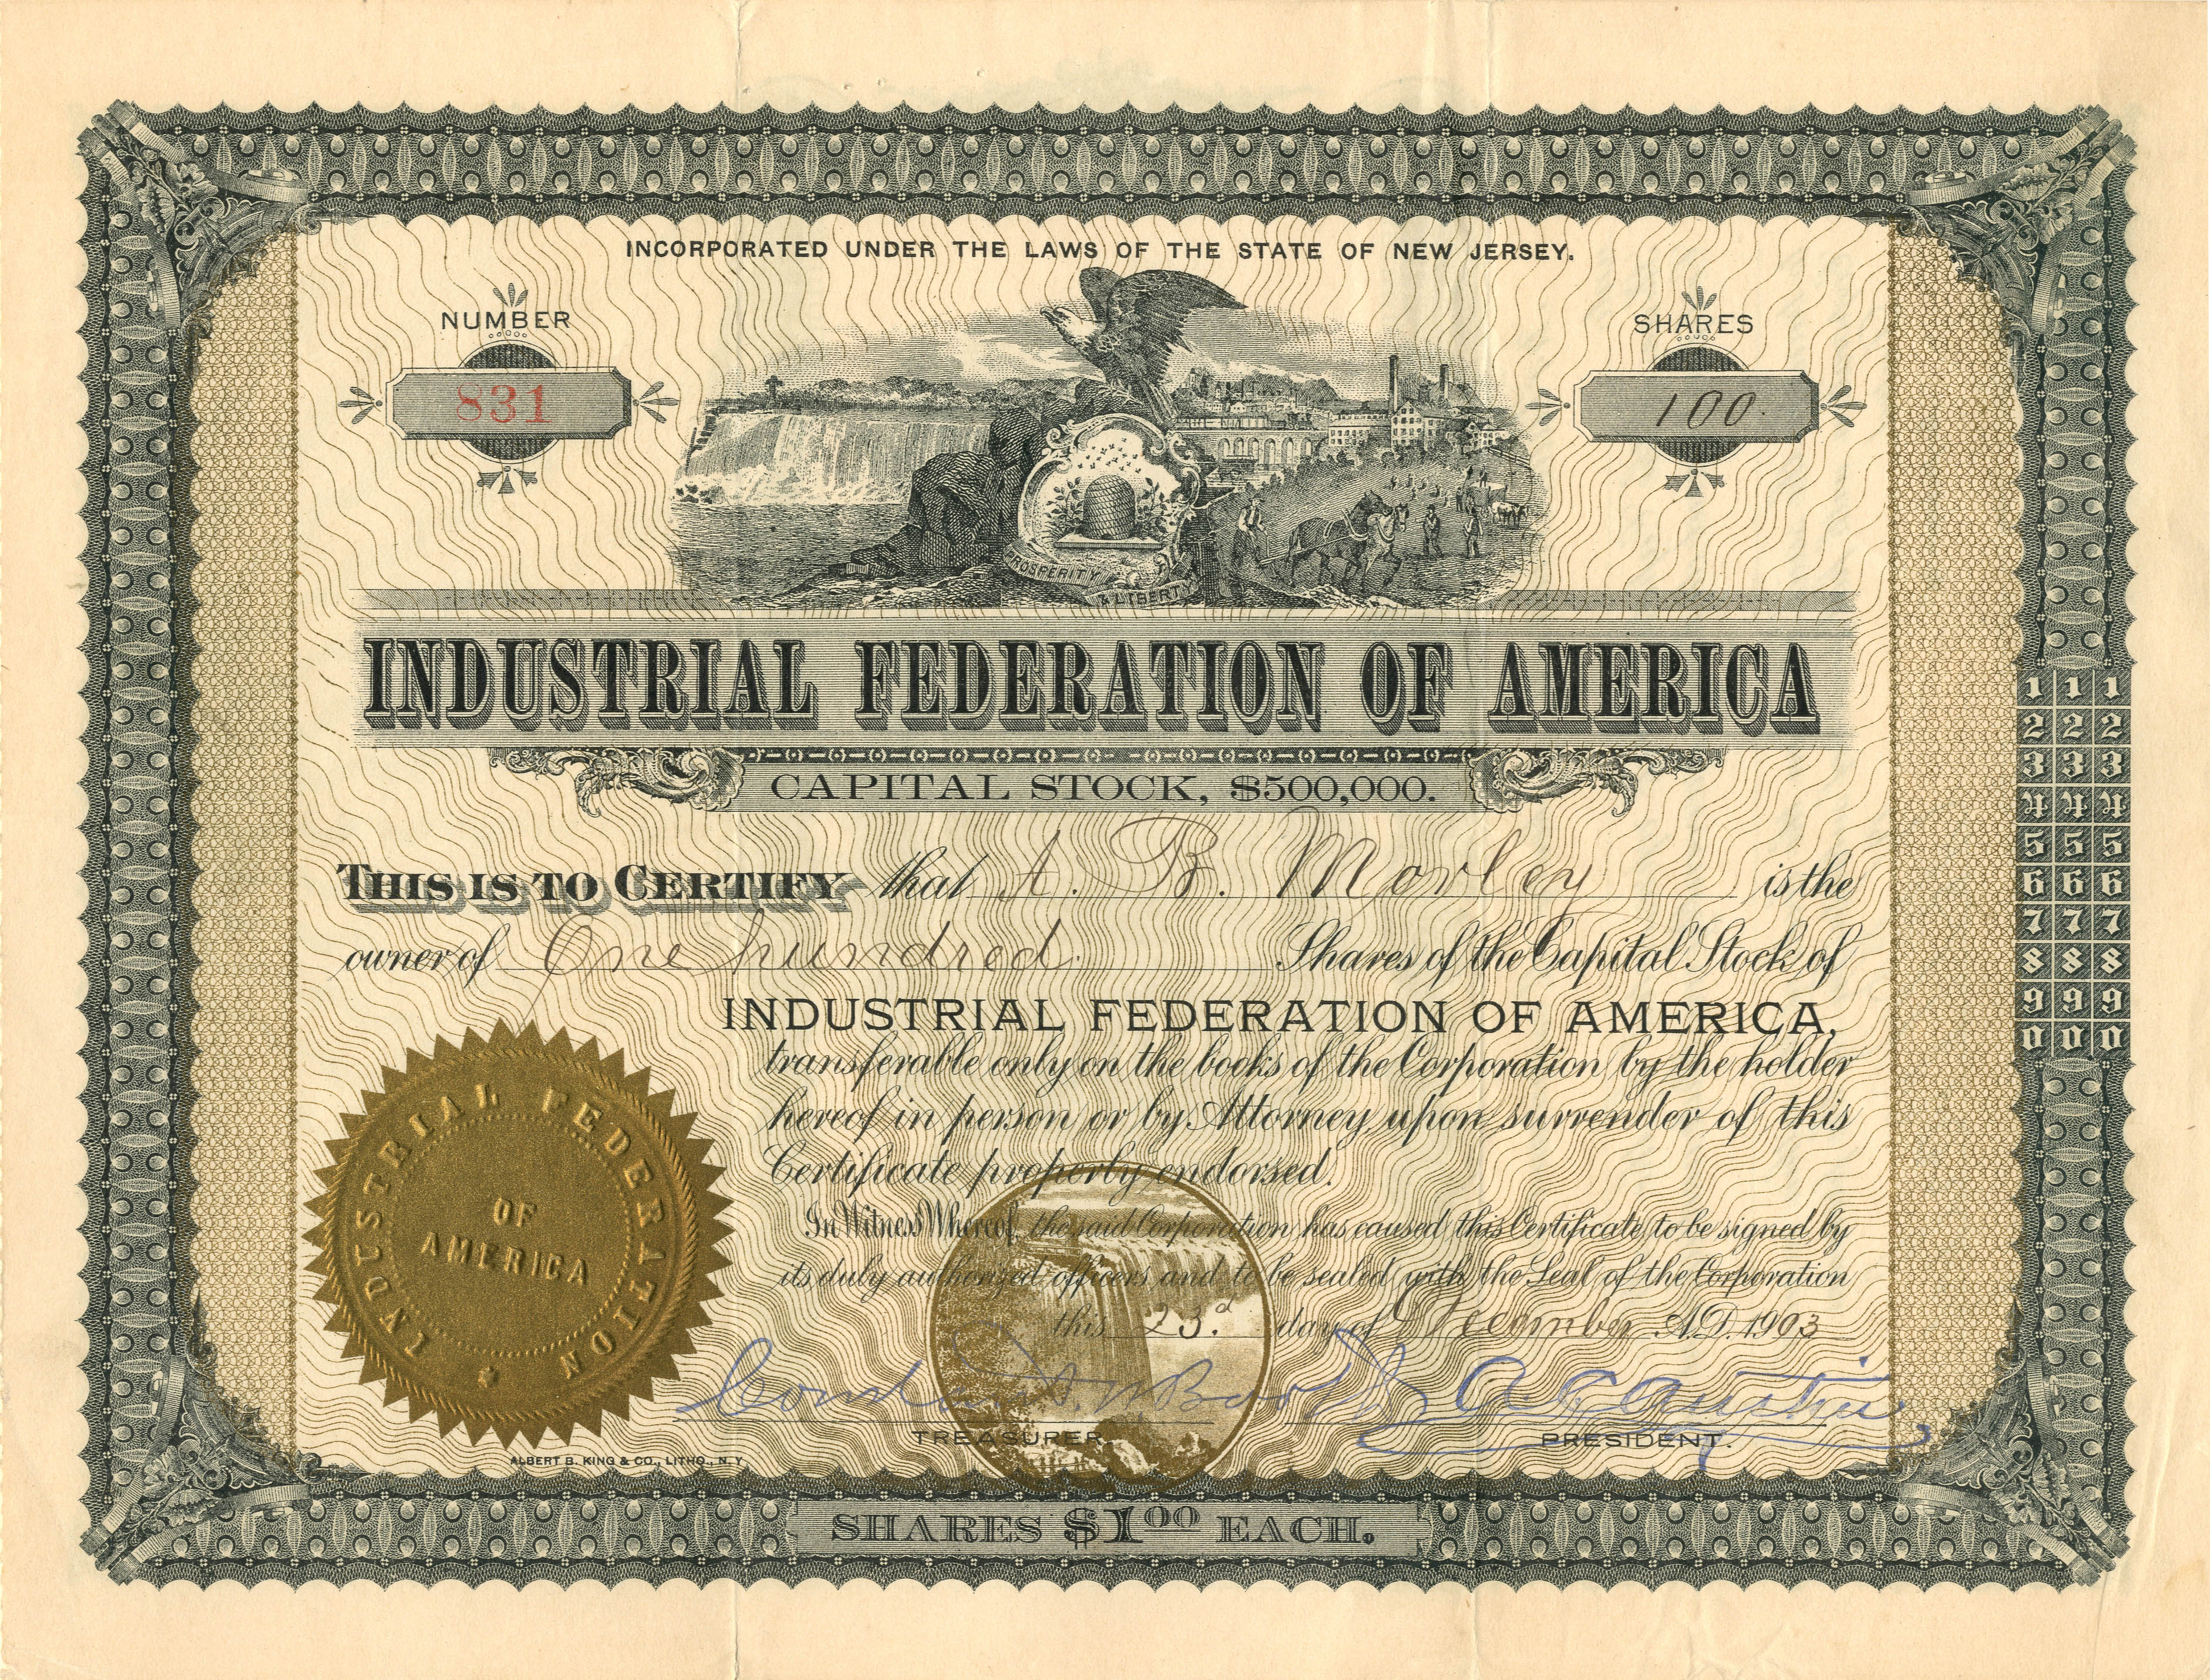 Industrial Federation of America - Stock Certificate